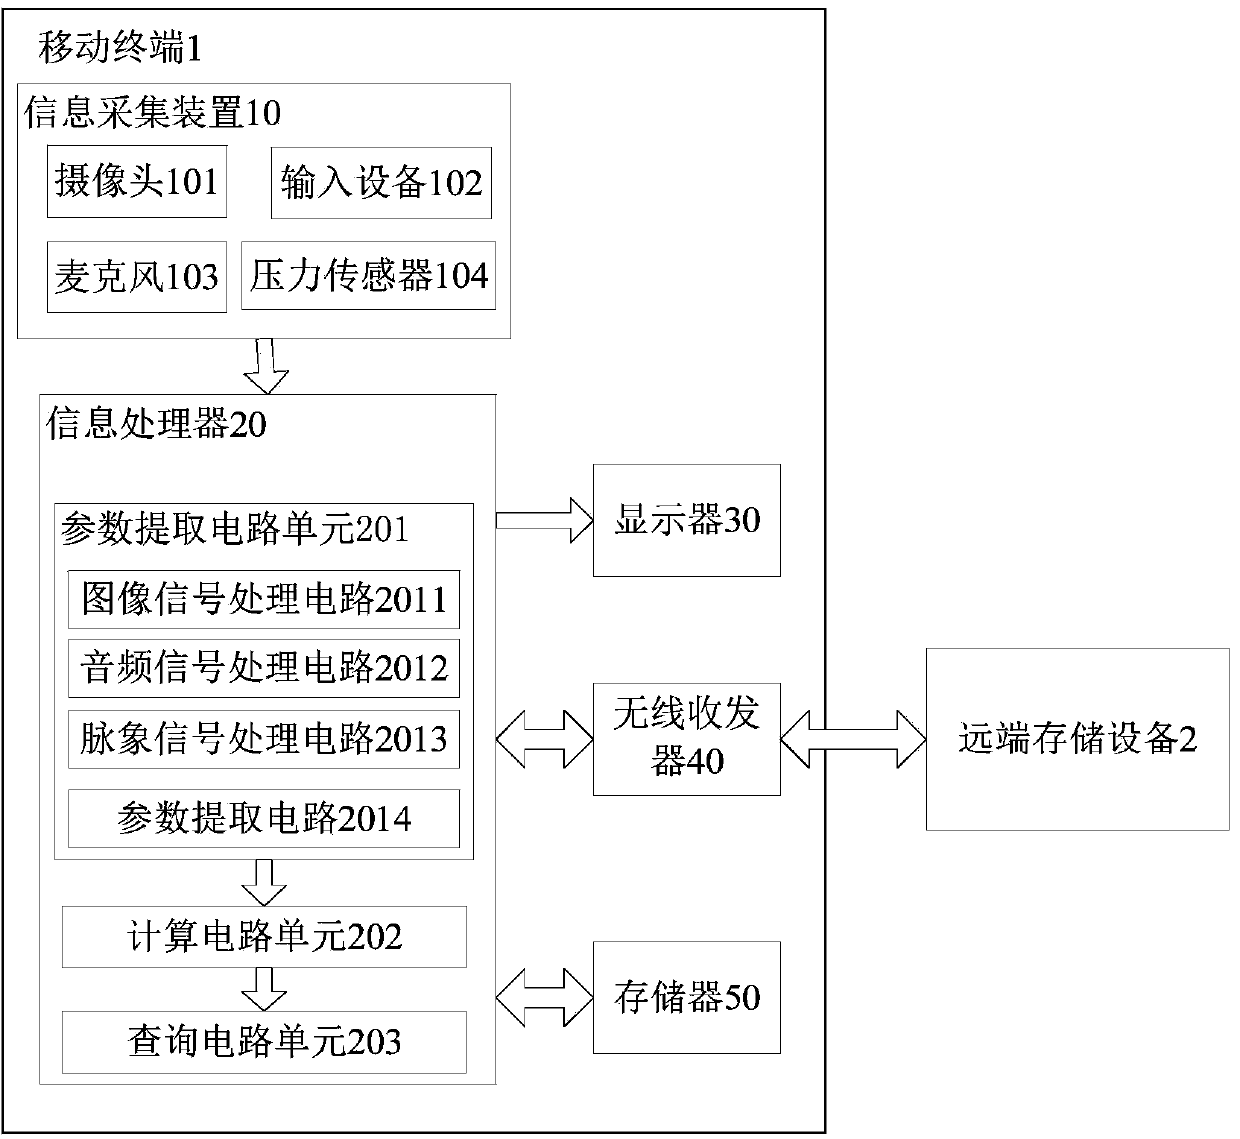 System and method for health status monitoring based on traditional Chinese medicine diagnosis information